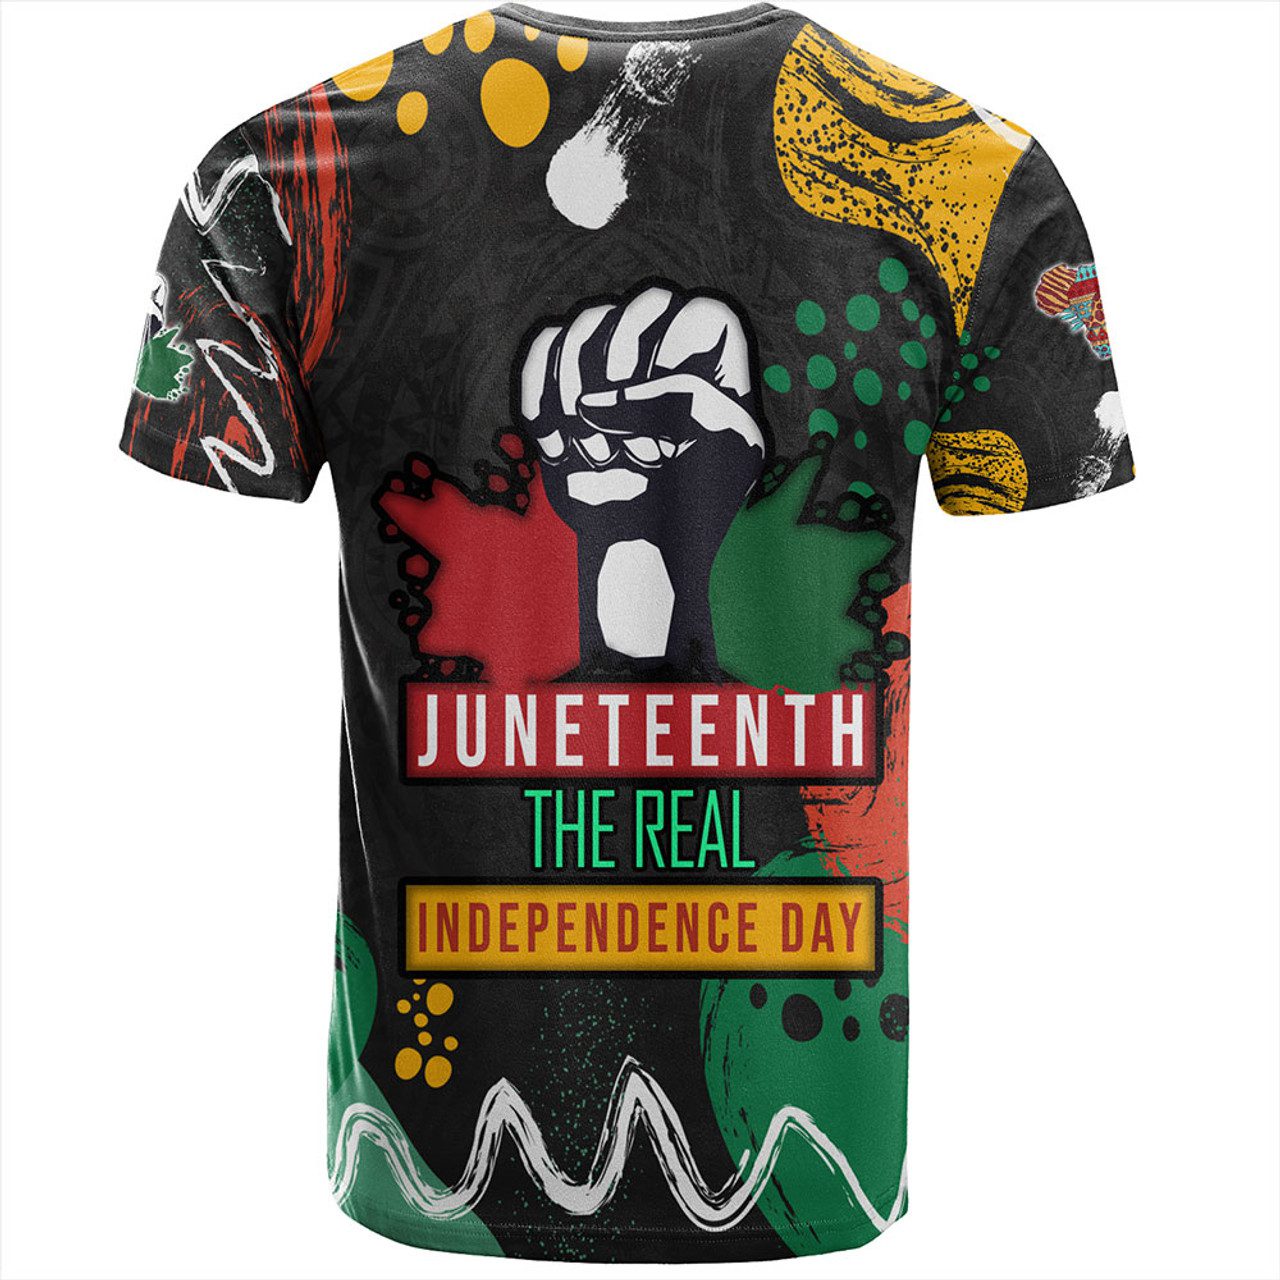 Juneteenth The Real Independence Day T-Shirt